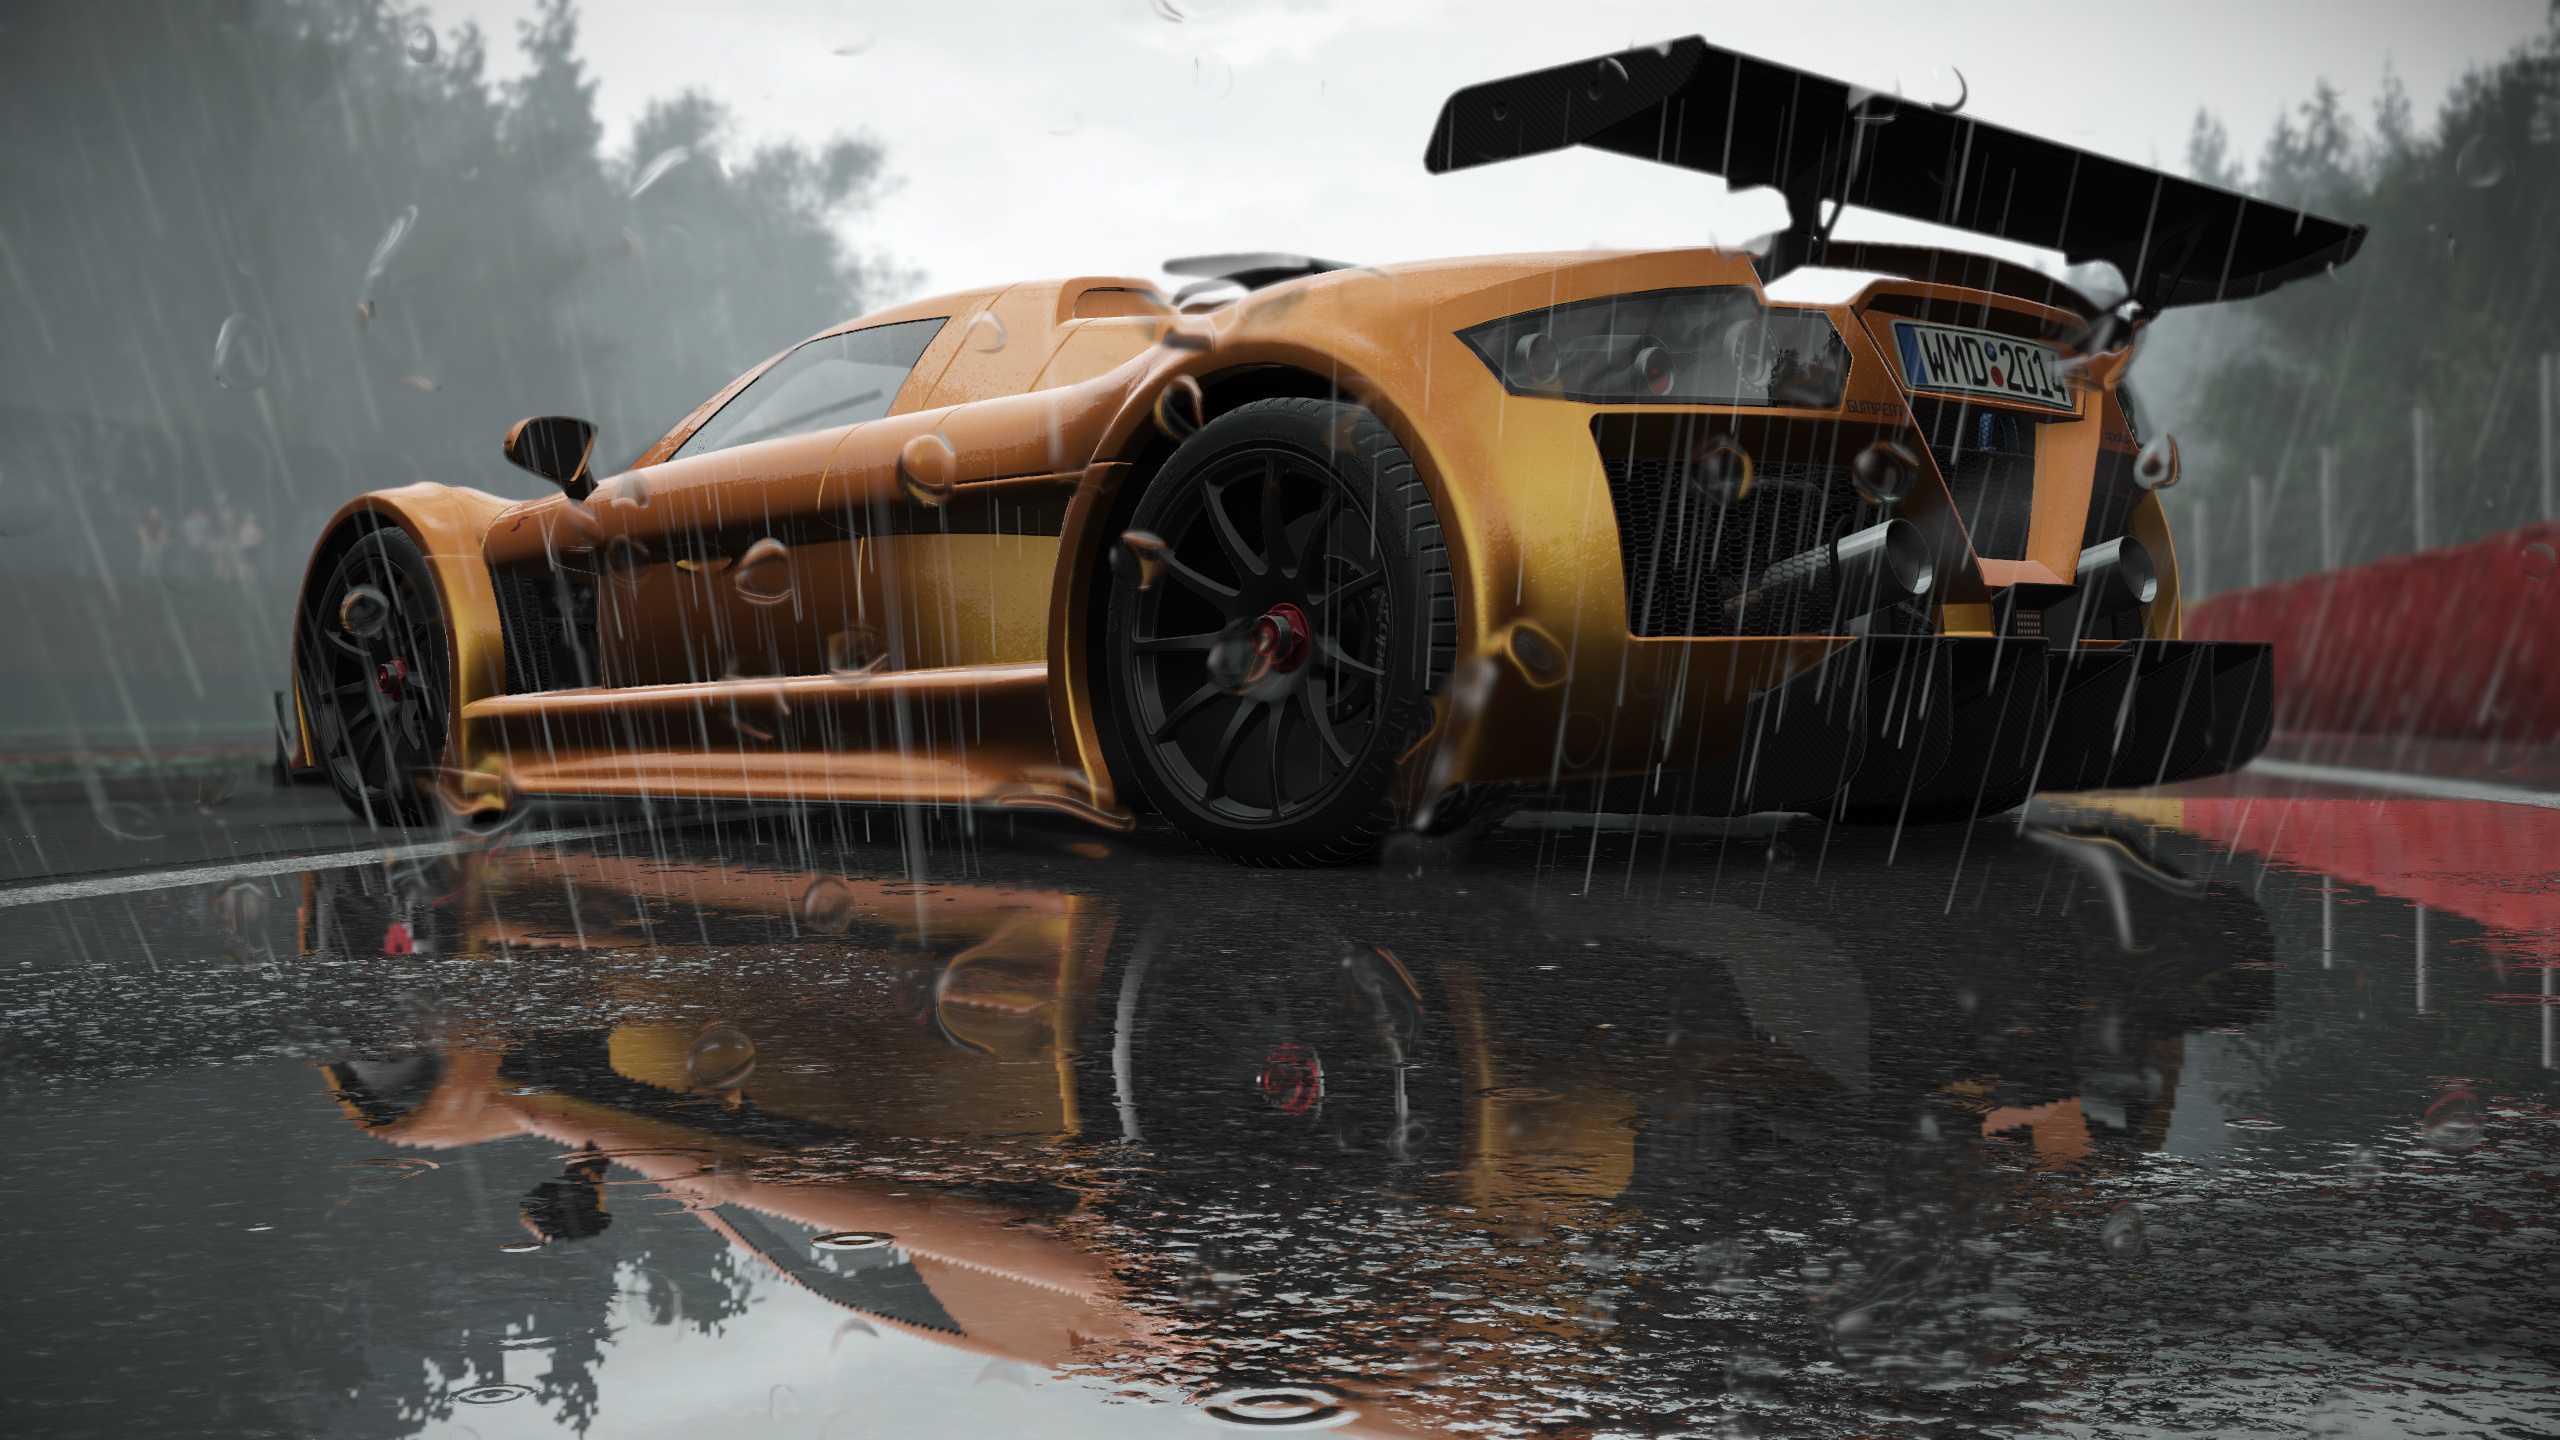 Cool Project Cars Backgrounds